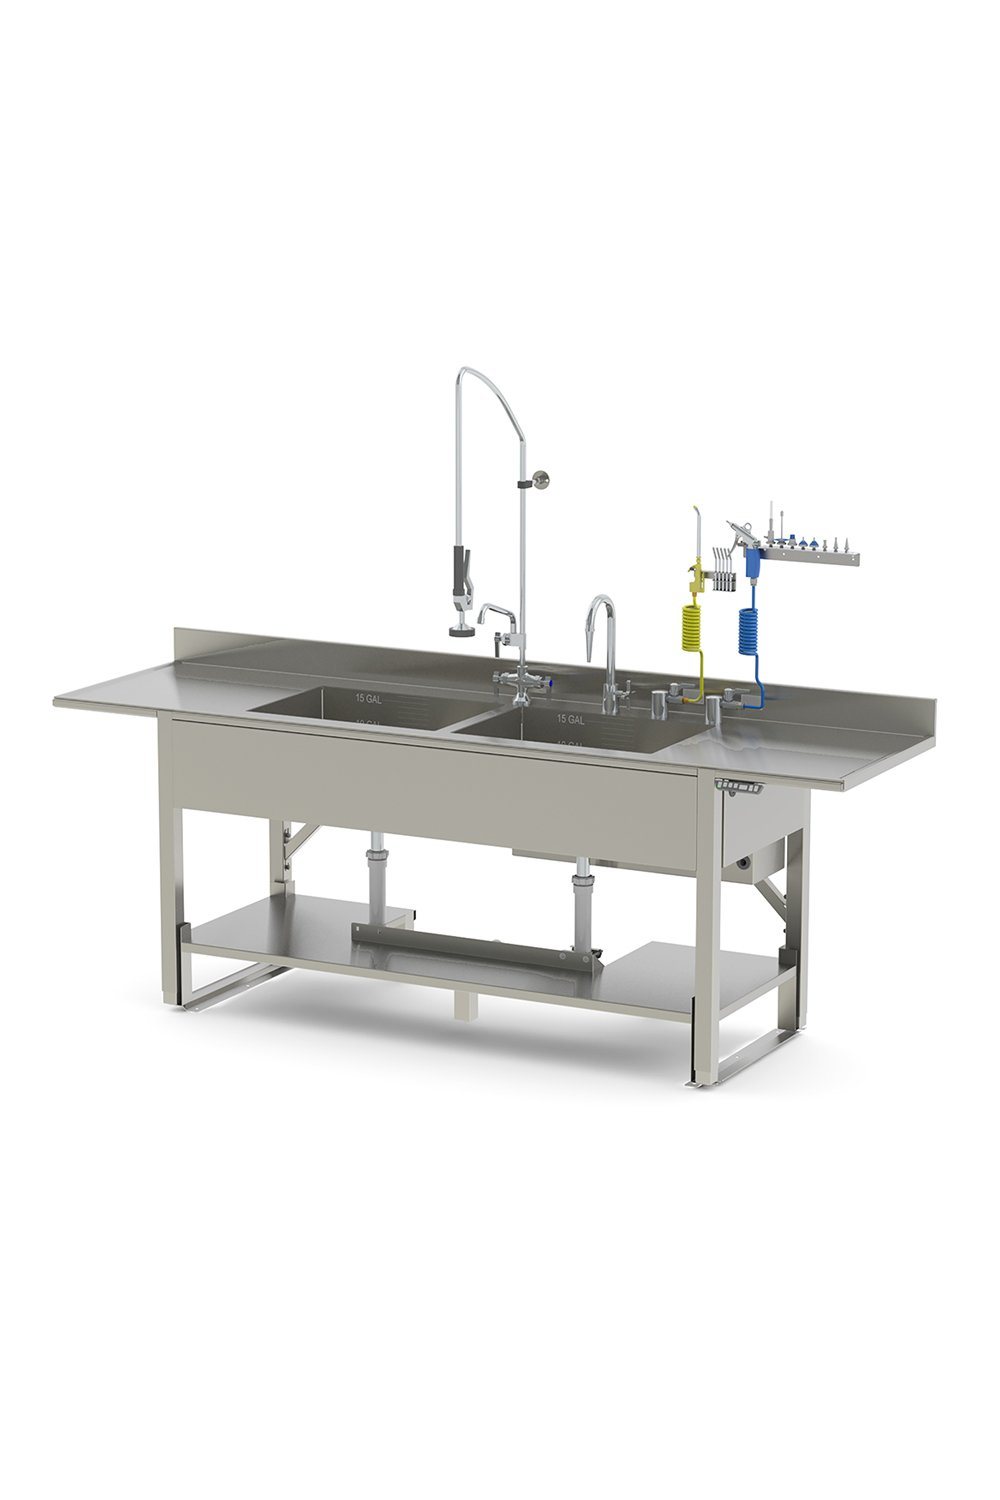 Processing Sink Stainless Solutions Macmedical 26" X 96" X 35-42"H 2.0 